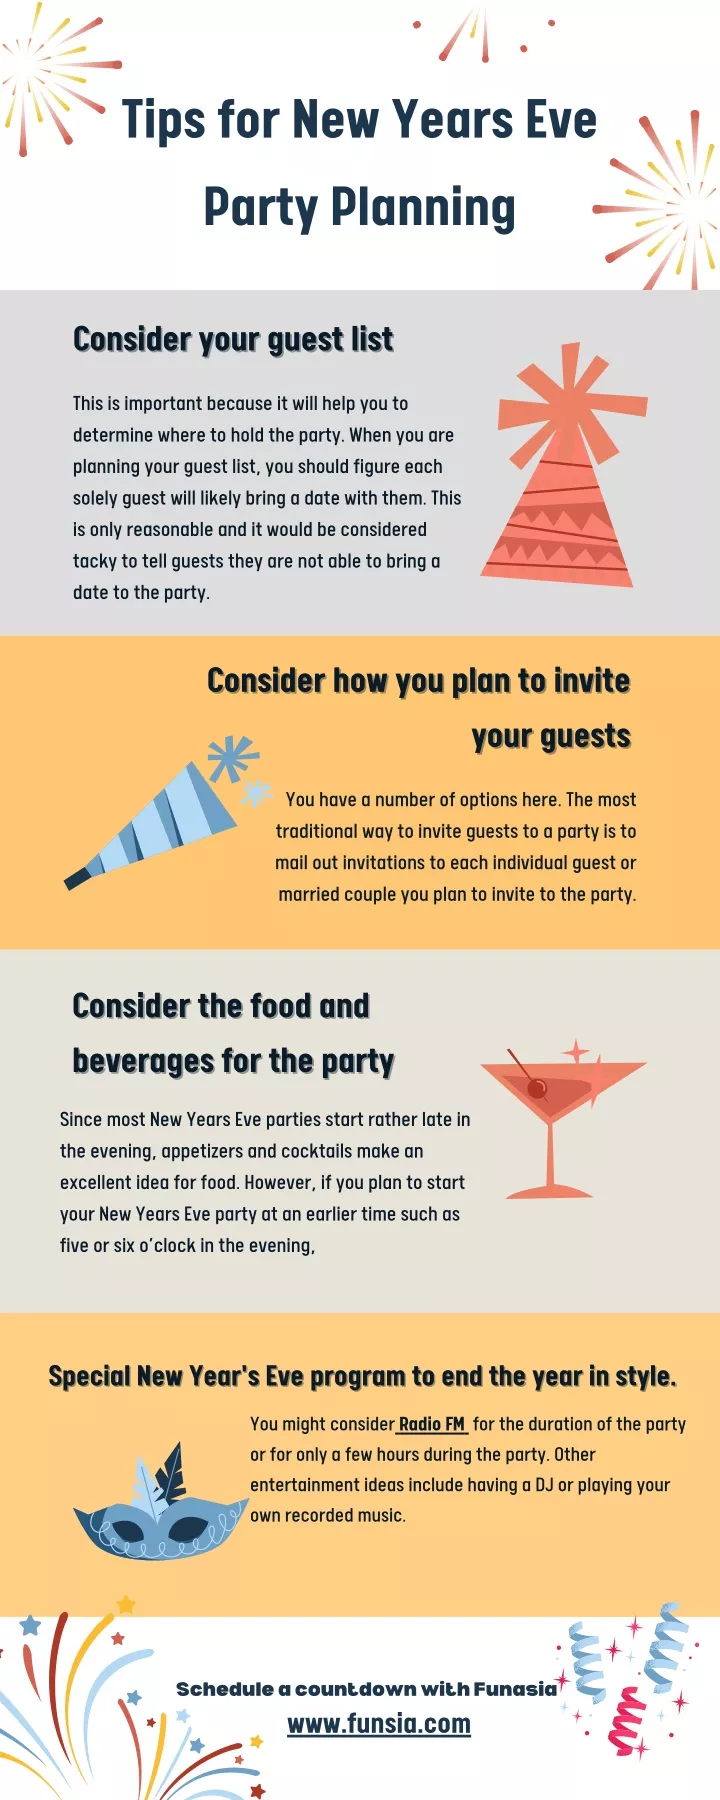 tips for new years eve party planning